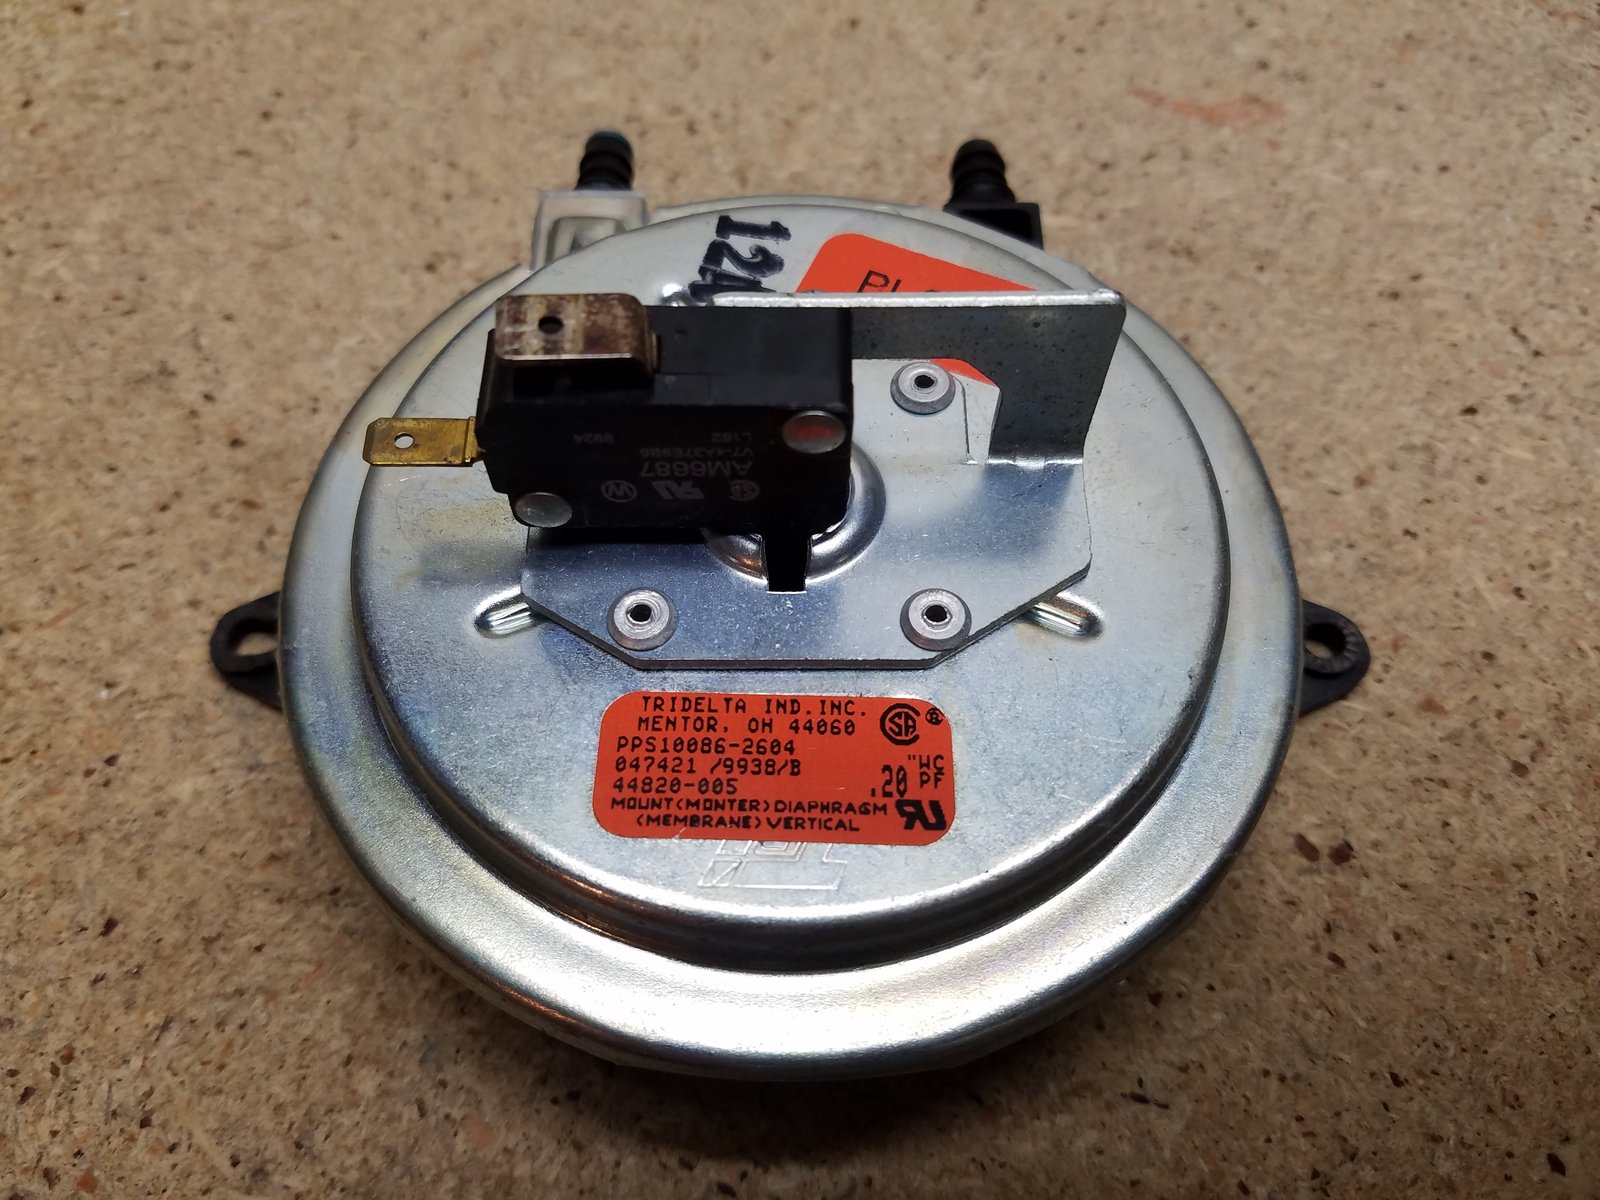 Armstrong oem furnace pressure switch 44820-005 - $30.00